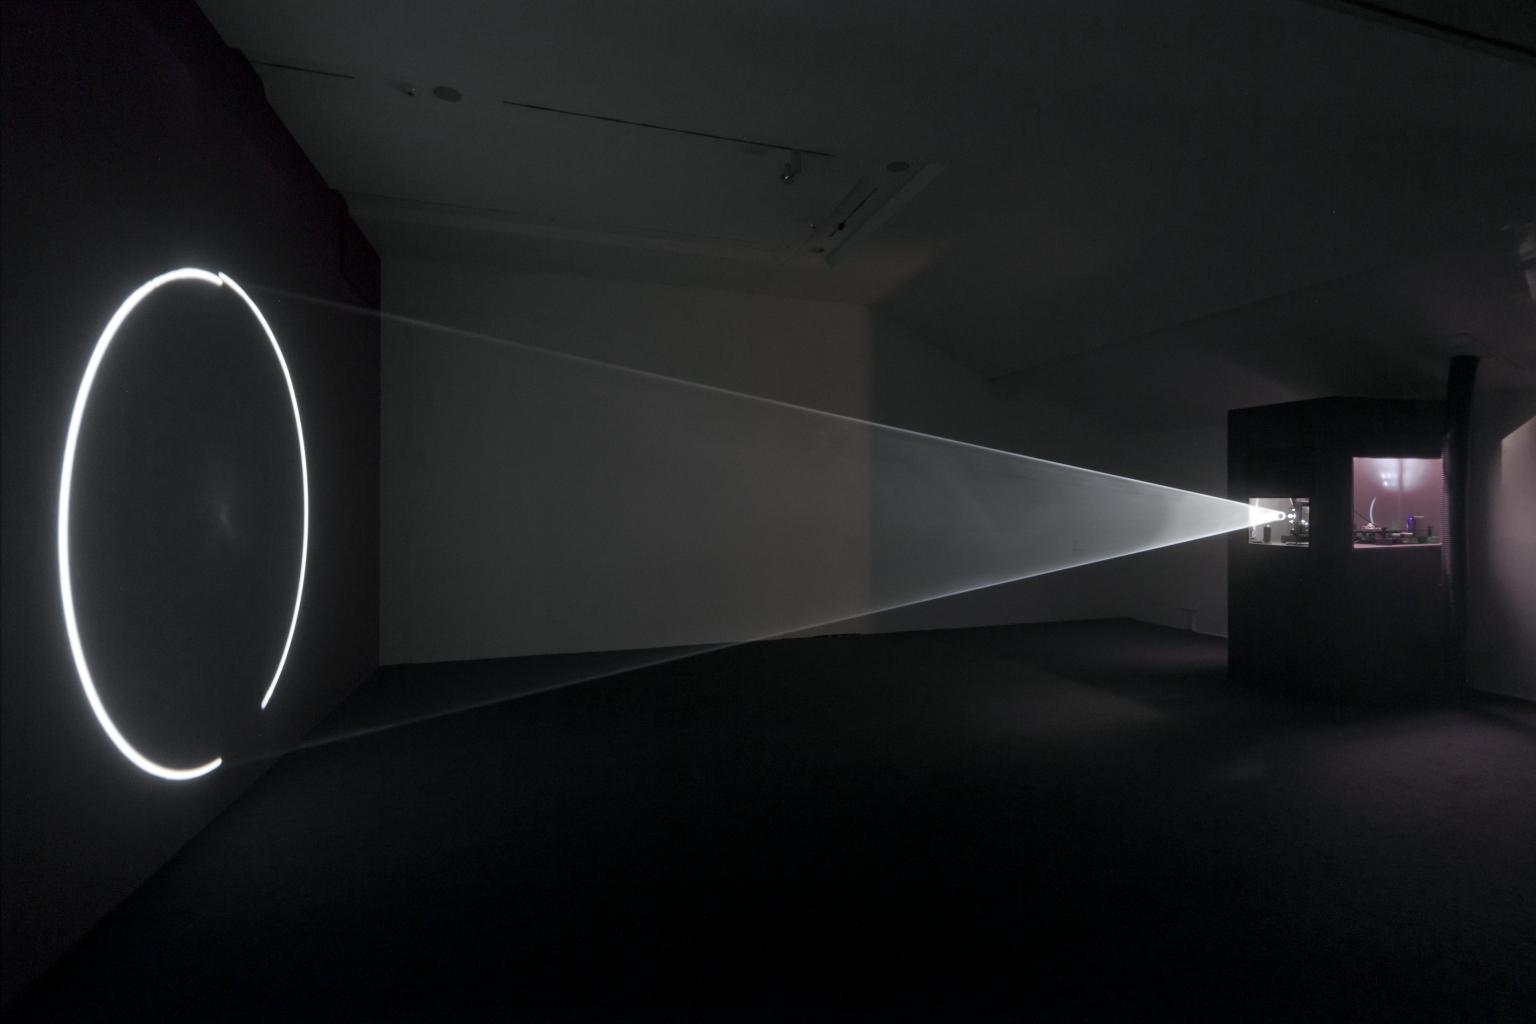 Line Describing a Cone 1973 by Anthony McCall born 1946